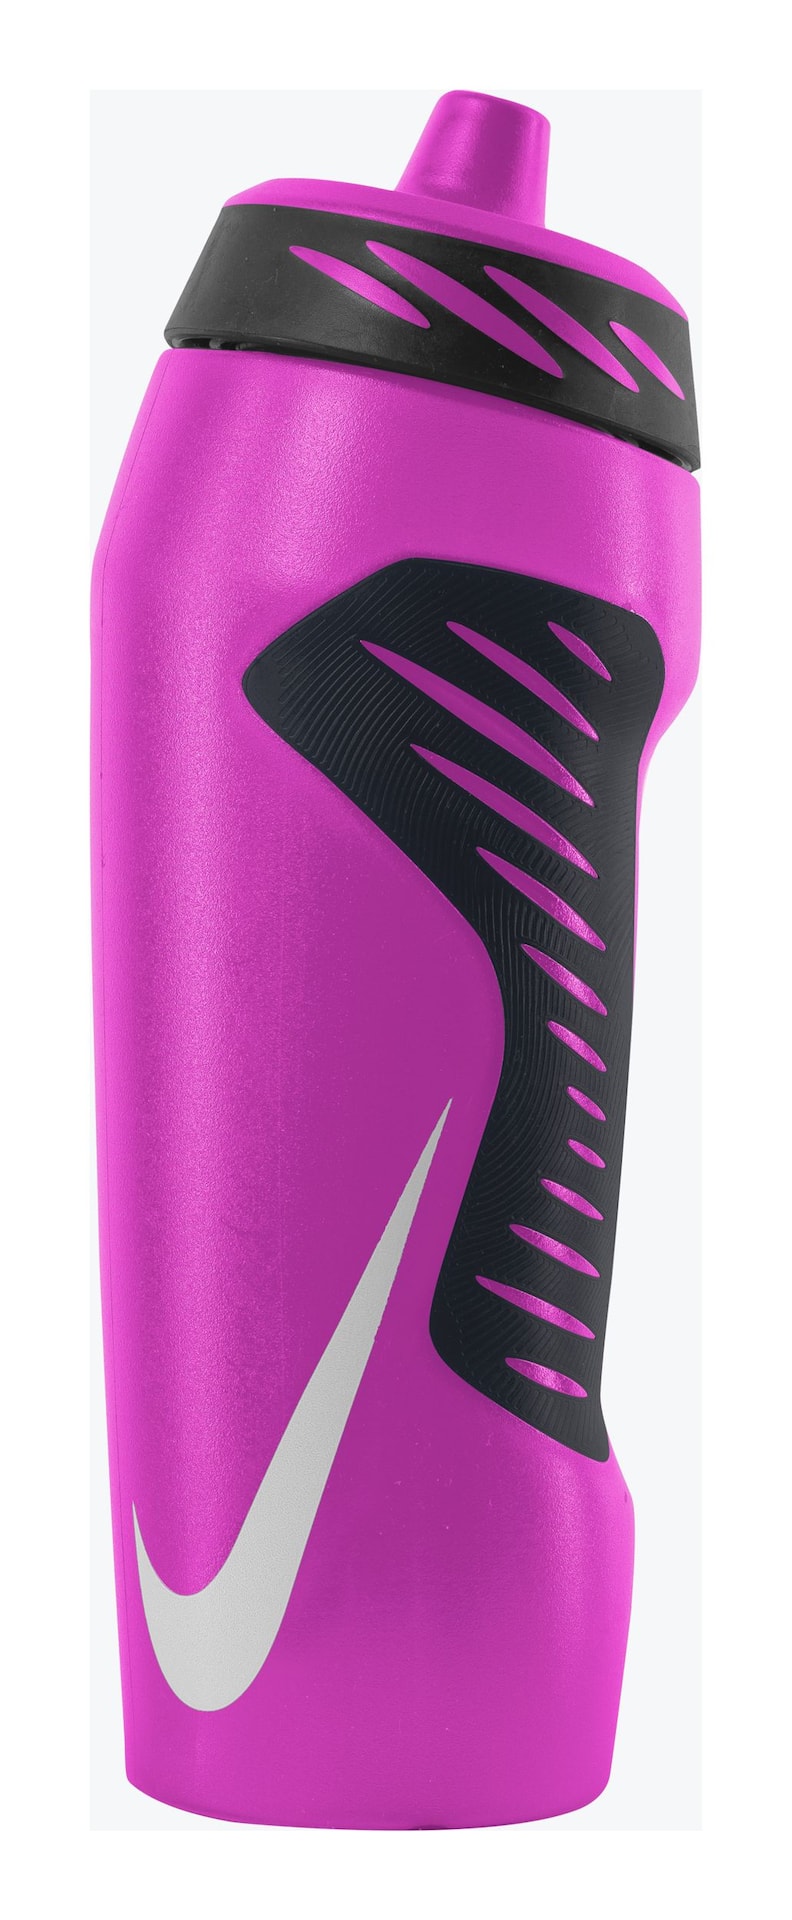 https://media-www.canadiantire.ca/product/playing/exercise/exercise-accessories/1840587/nike-hyperfuel-water-bottle-24oz-pink-pow-black-white-334c1e07-f4b3-4e2e-bcbf-15b3f00f4b99-jpgrendition.jpg